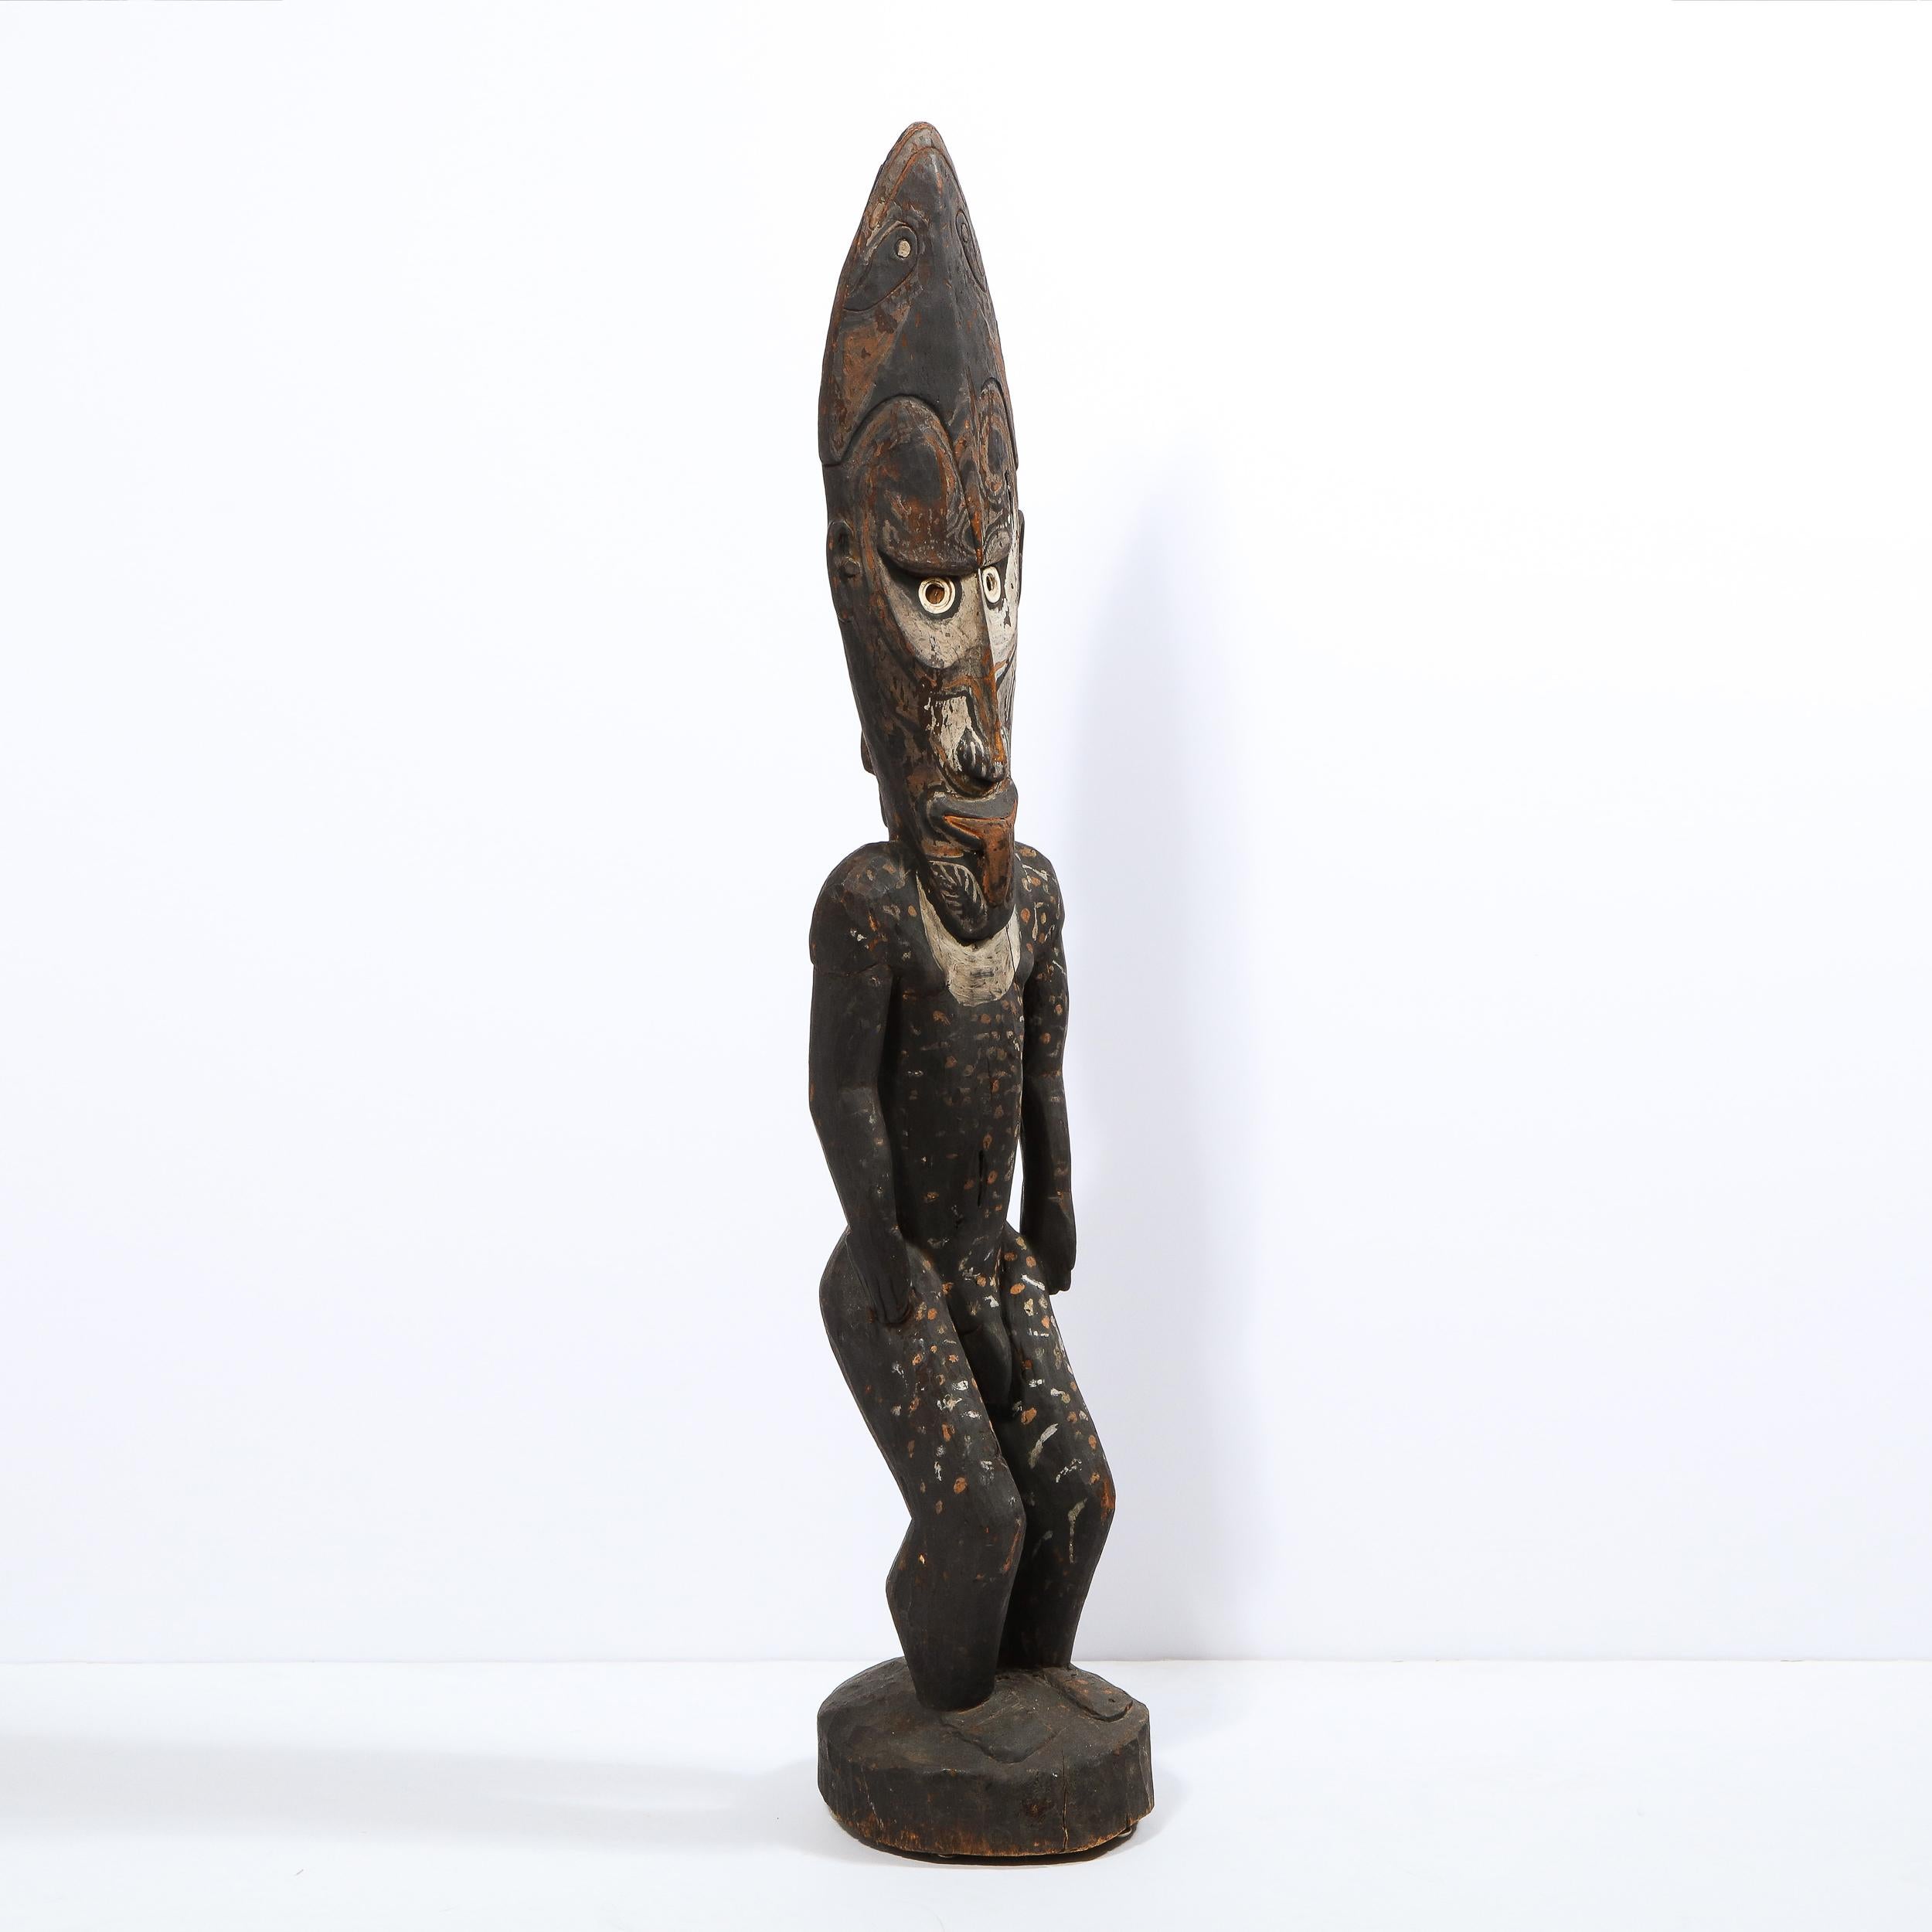 Realized in Papua New Guinea circa 1960, this is a striking example of tribal sculptures from the region. The oversized ovoid head has inset circular eyes rendered in white pigment. Traces of organic pigment have been painted over the surface of the